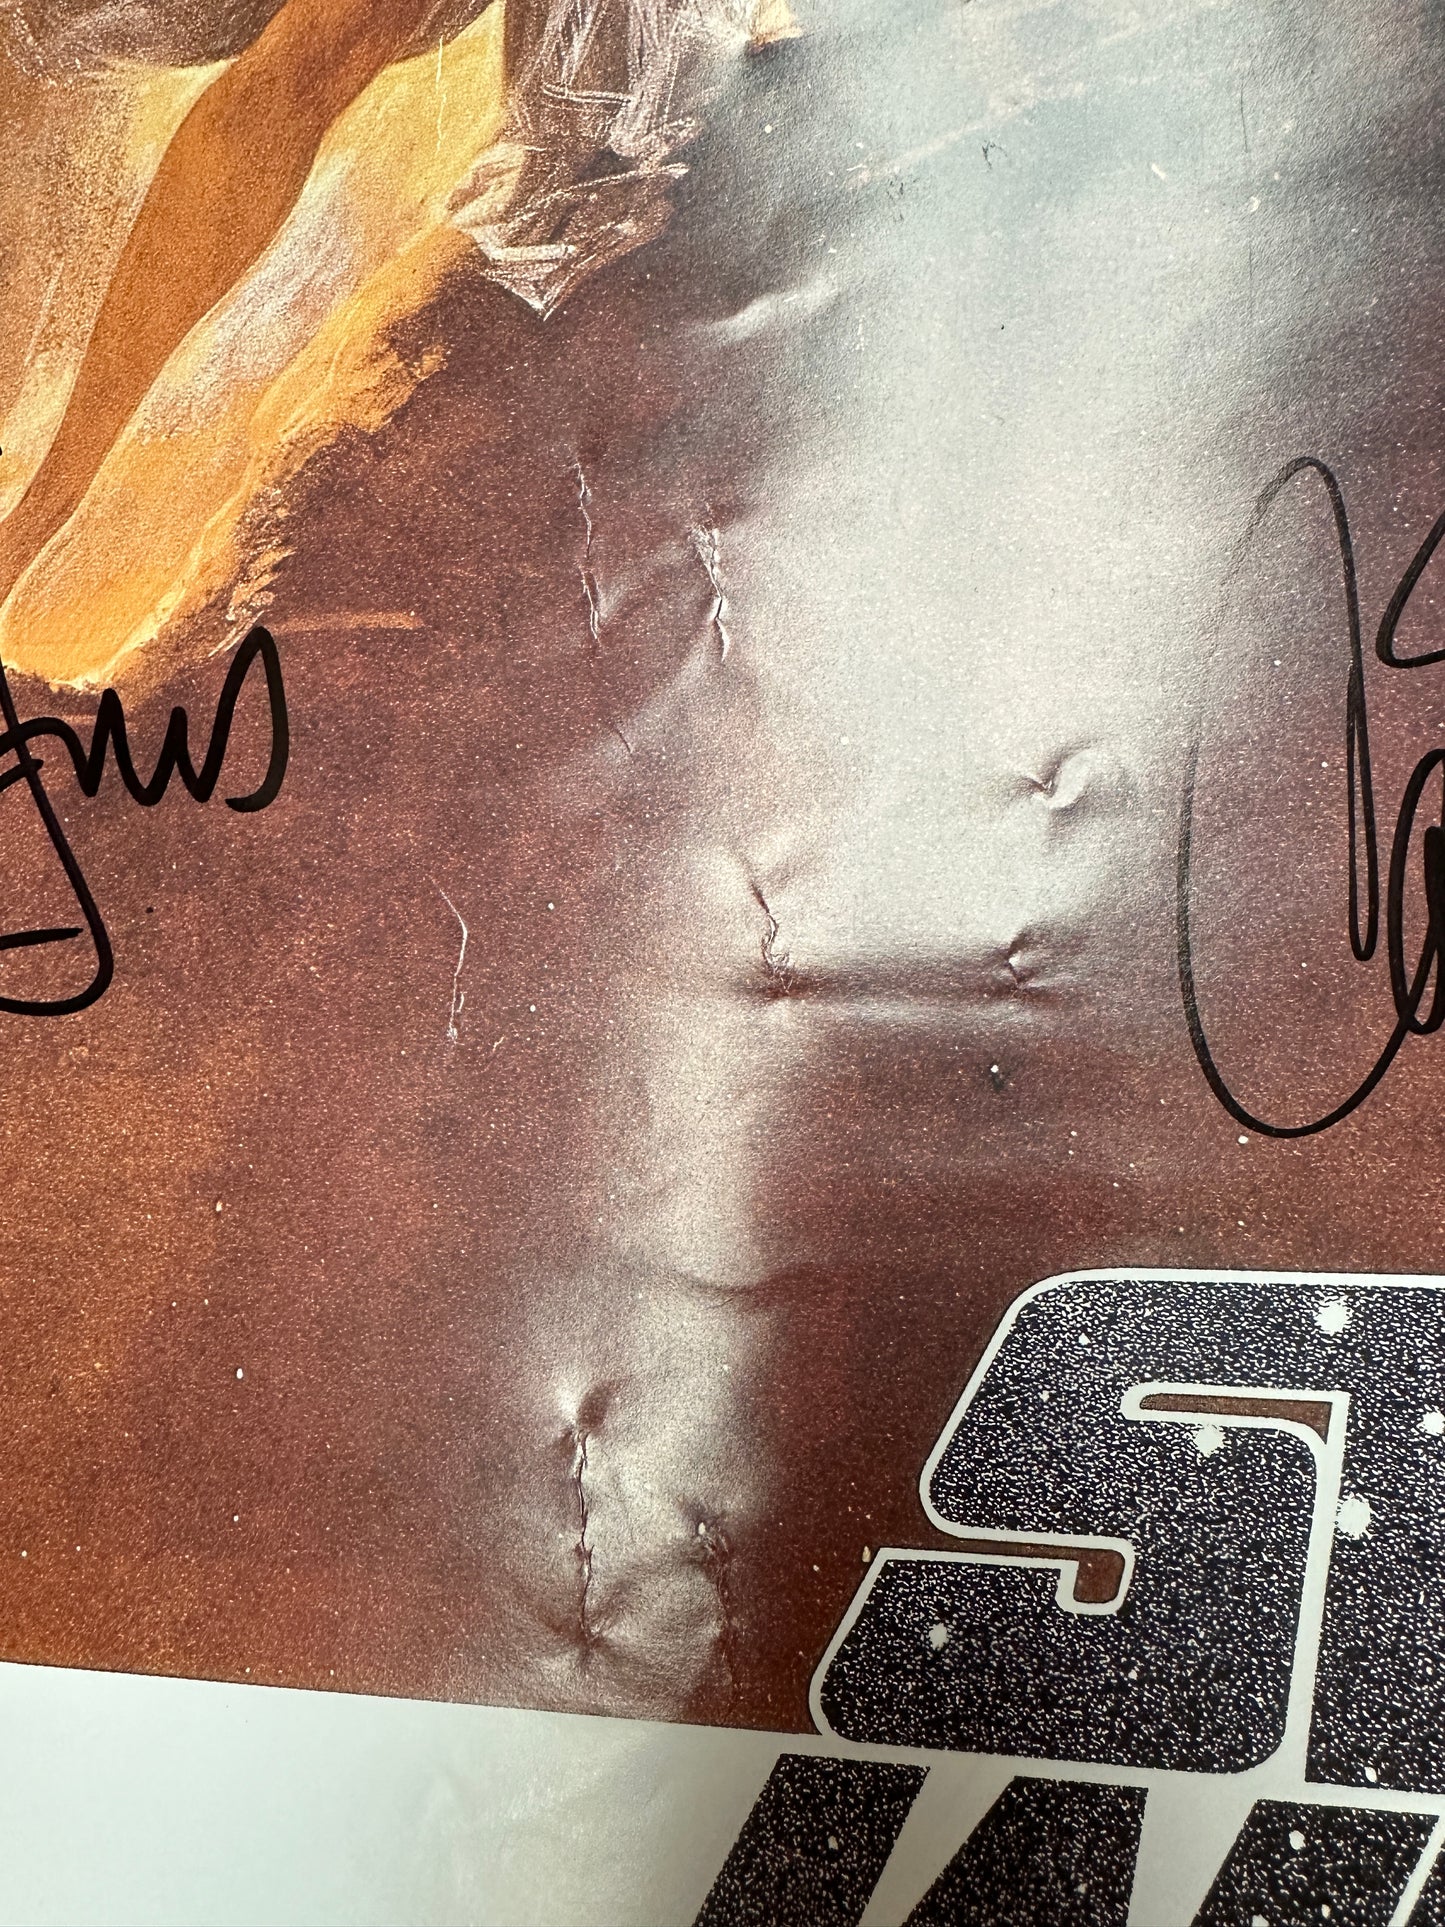 
                  
                    Star Wars: A New Hope 27x40 Poster Signed by Harrison Ford, Carrie Fisher, Mark Hamill, Peter Mayhew, Anthony Daniels, & Dave Prowse
                  
                